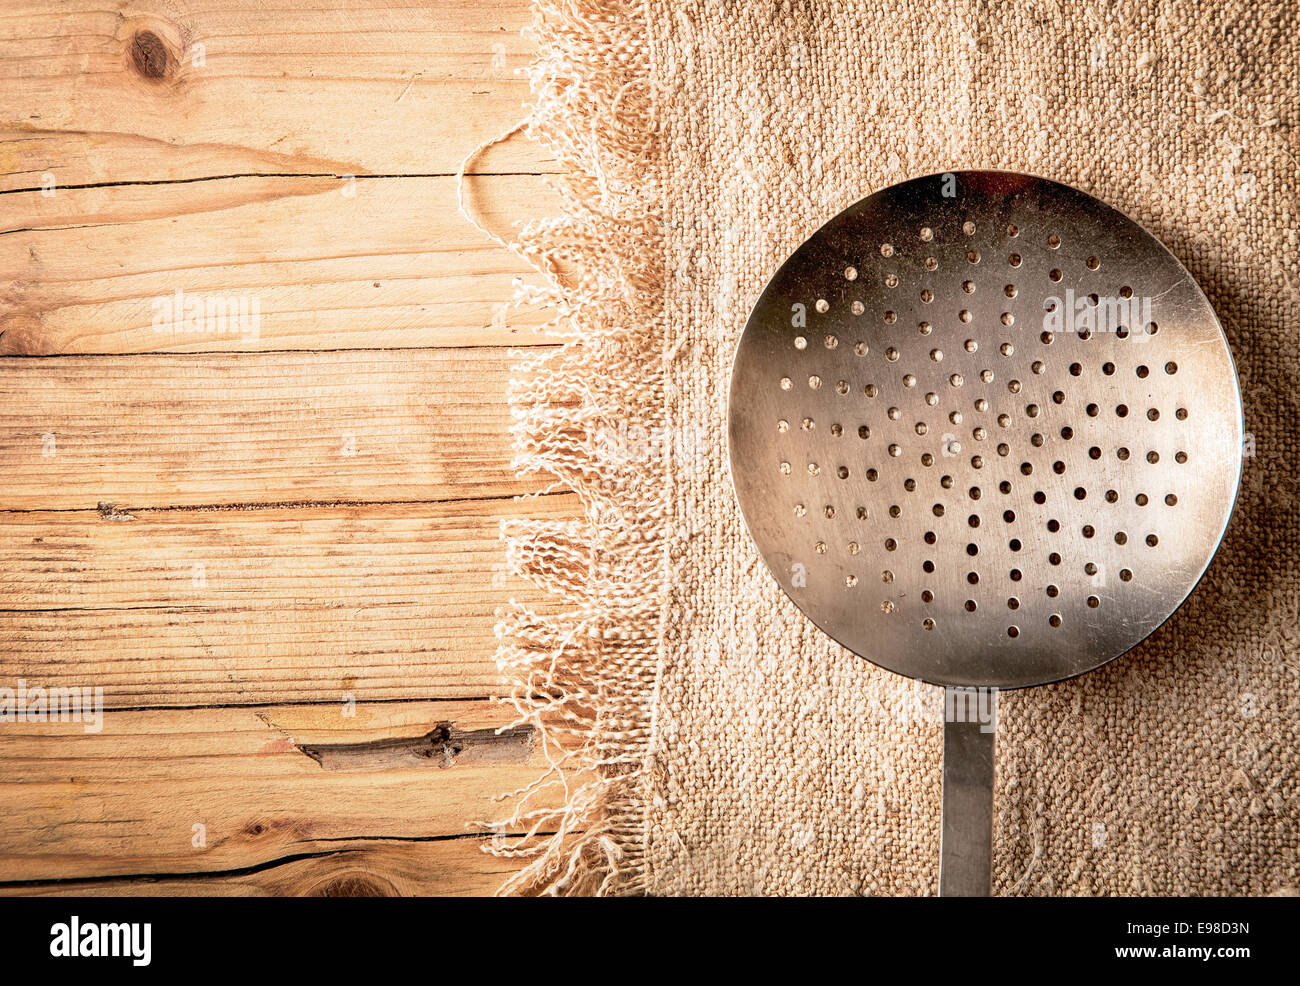 Old circular metal colander, sieve or strainer with perforated holes for draining vegetables while preparing a meal in a country kitchen over a textured wooden background with copyspace Stock Photo